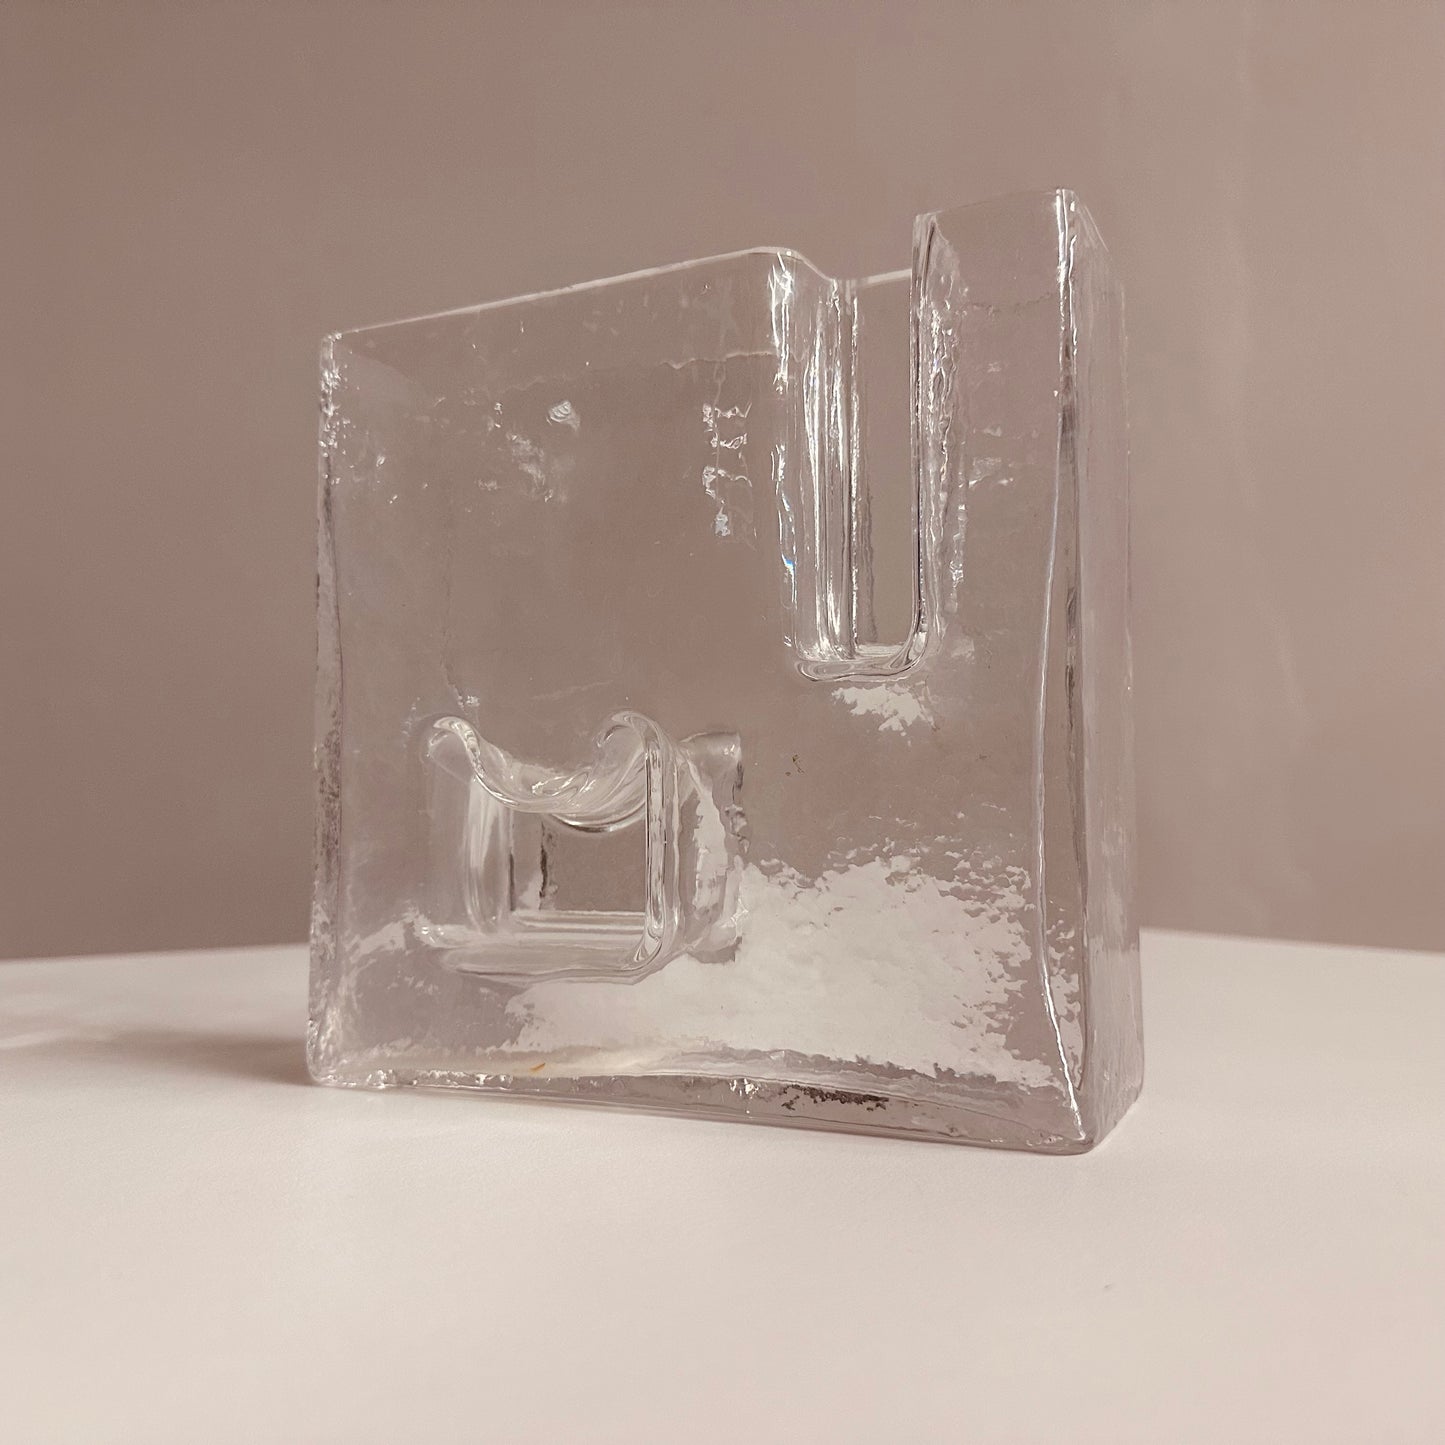 ICE ART GLASS VASE ATTRIBUTED TO CLAUS JOSEF RIEDEL, AUSTRIA, 1970S